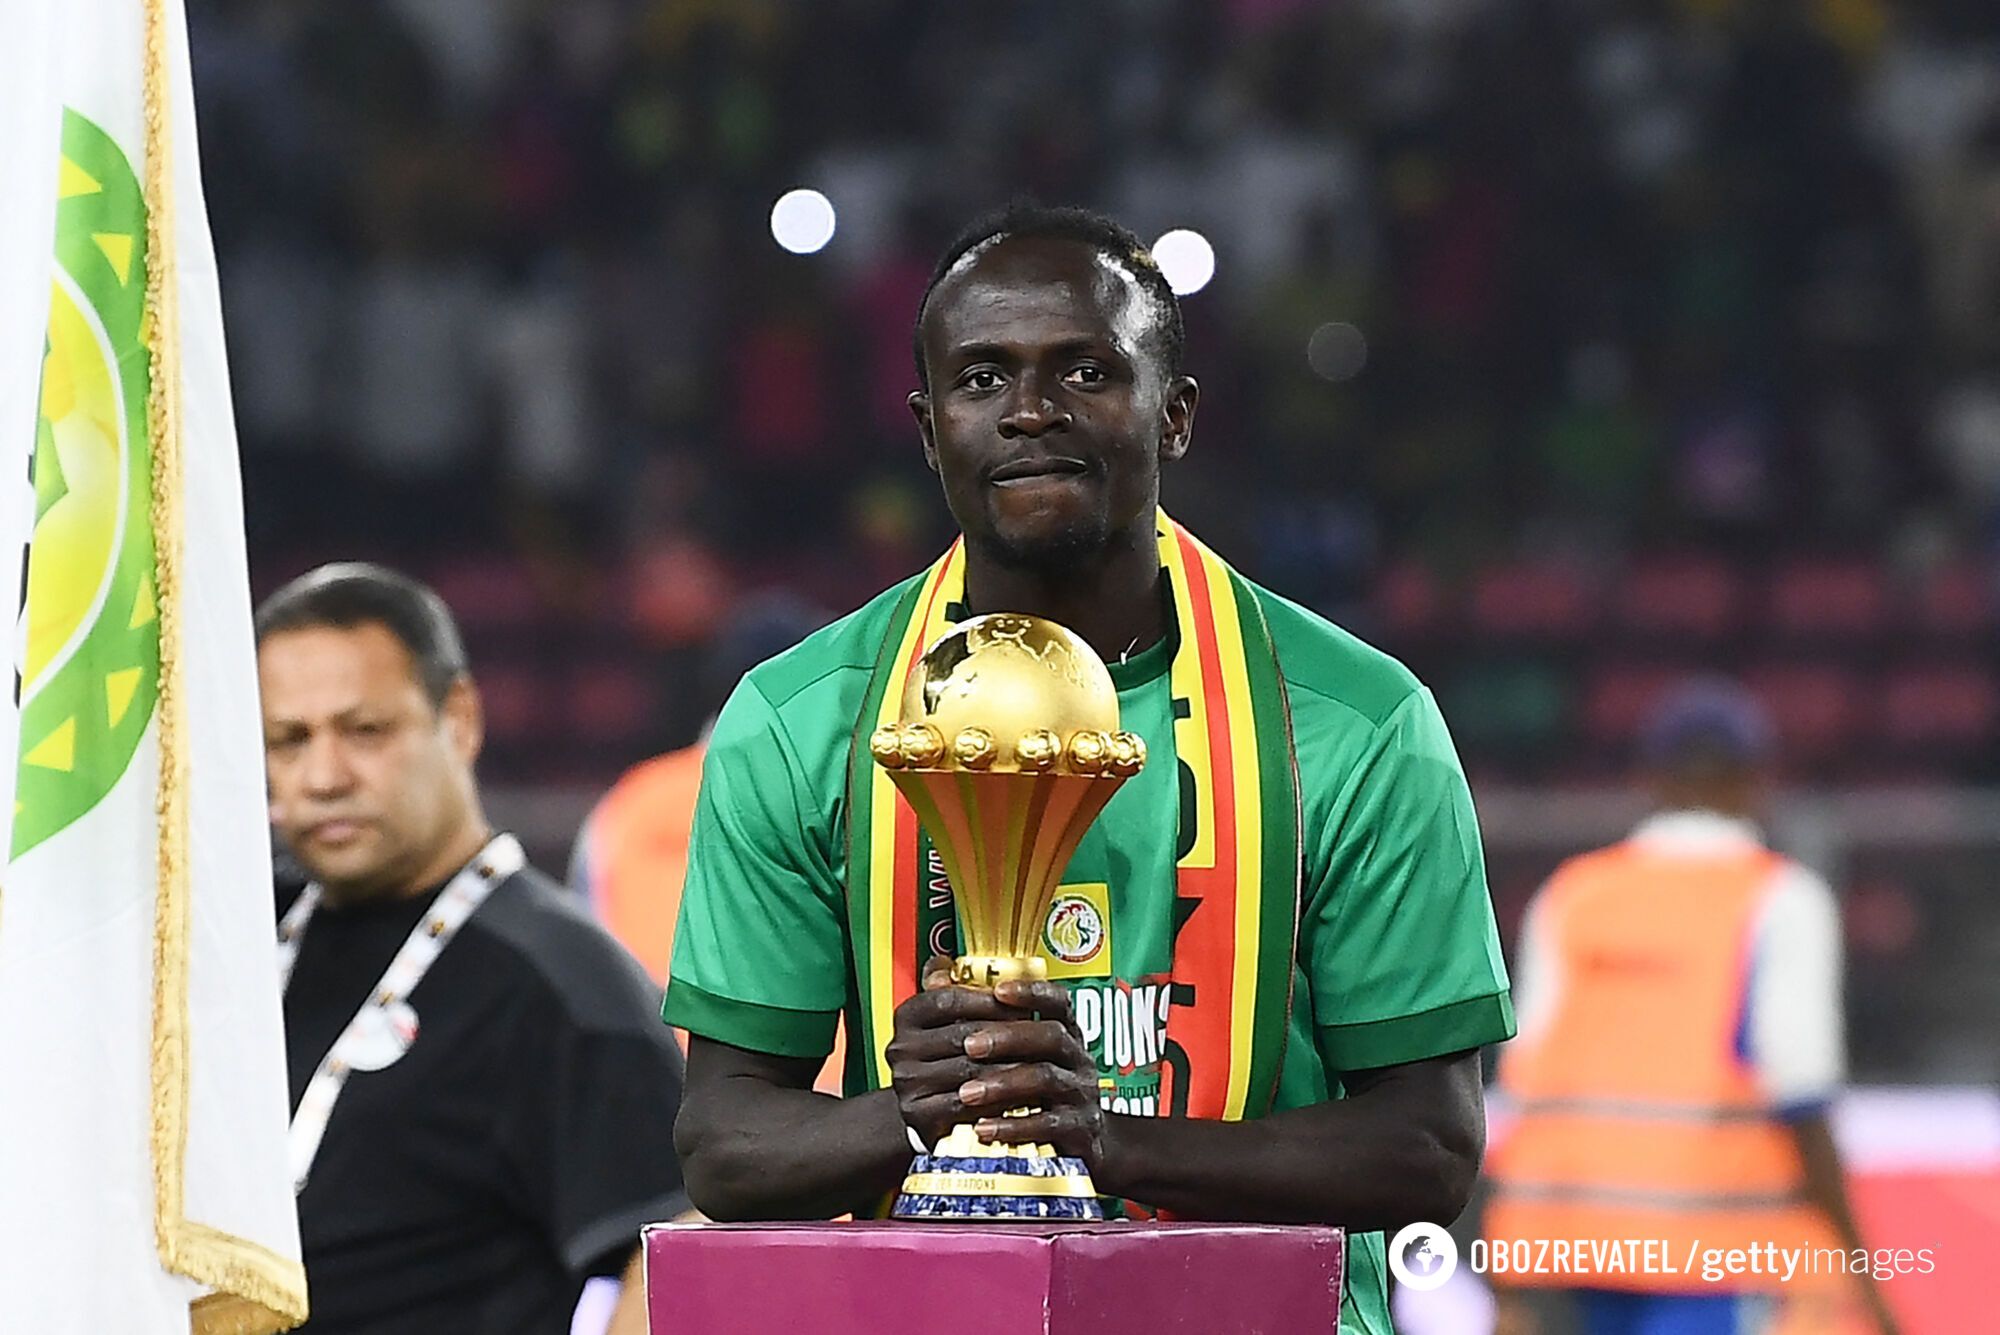 ''Praying well'' and loving to pose: what is known about Sadio Mane's 19-year-old wife and why the Senegalese national team star hid her from the public